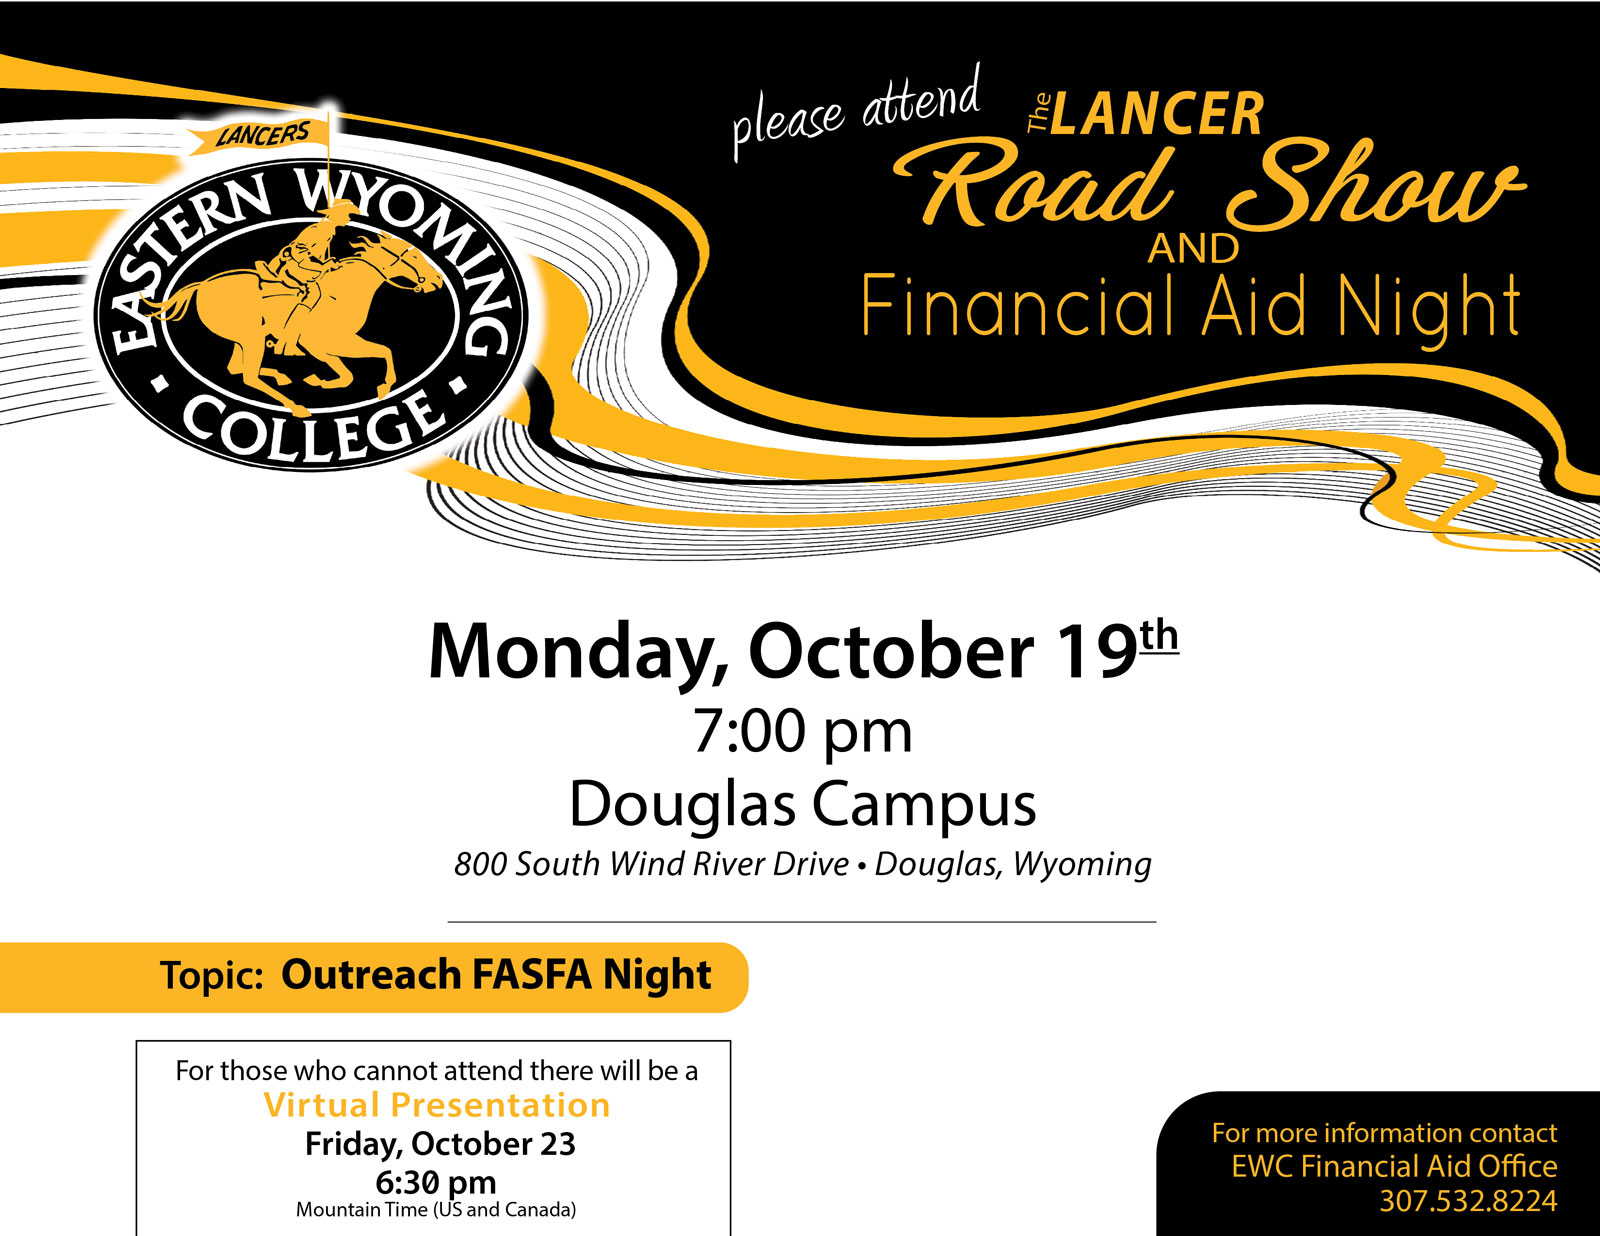 Lancer Road Show and Financial Aid Night - Douglas Campus - Monday, October 19th - 7:00pm